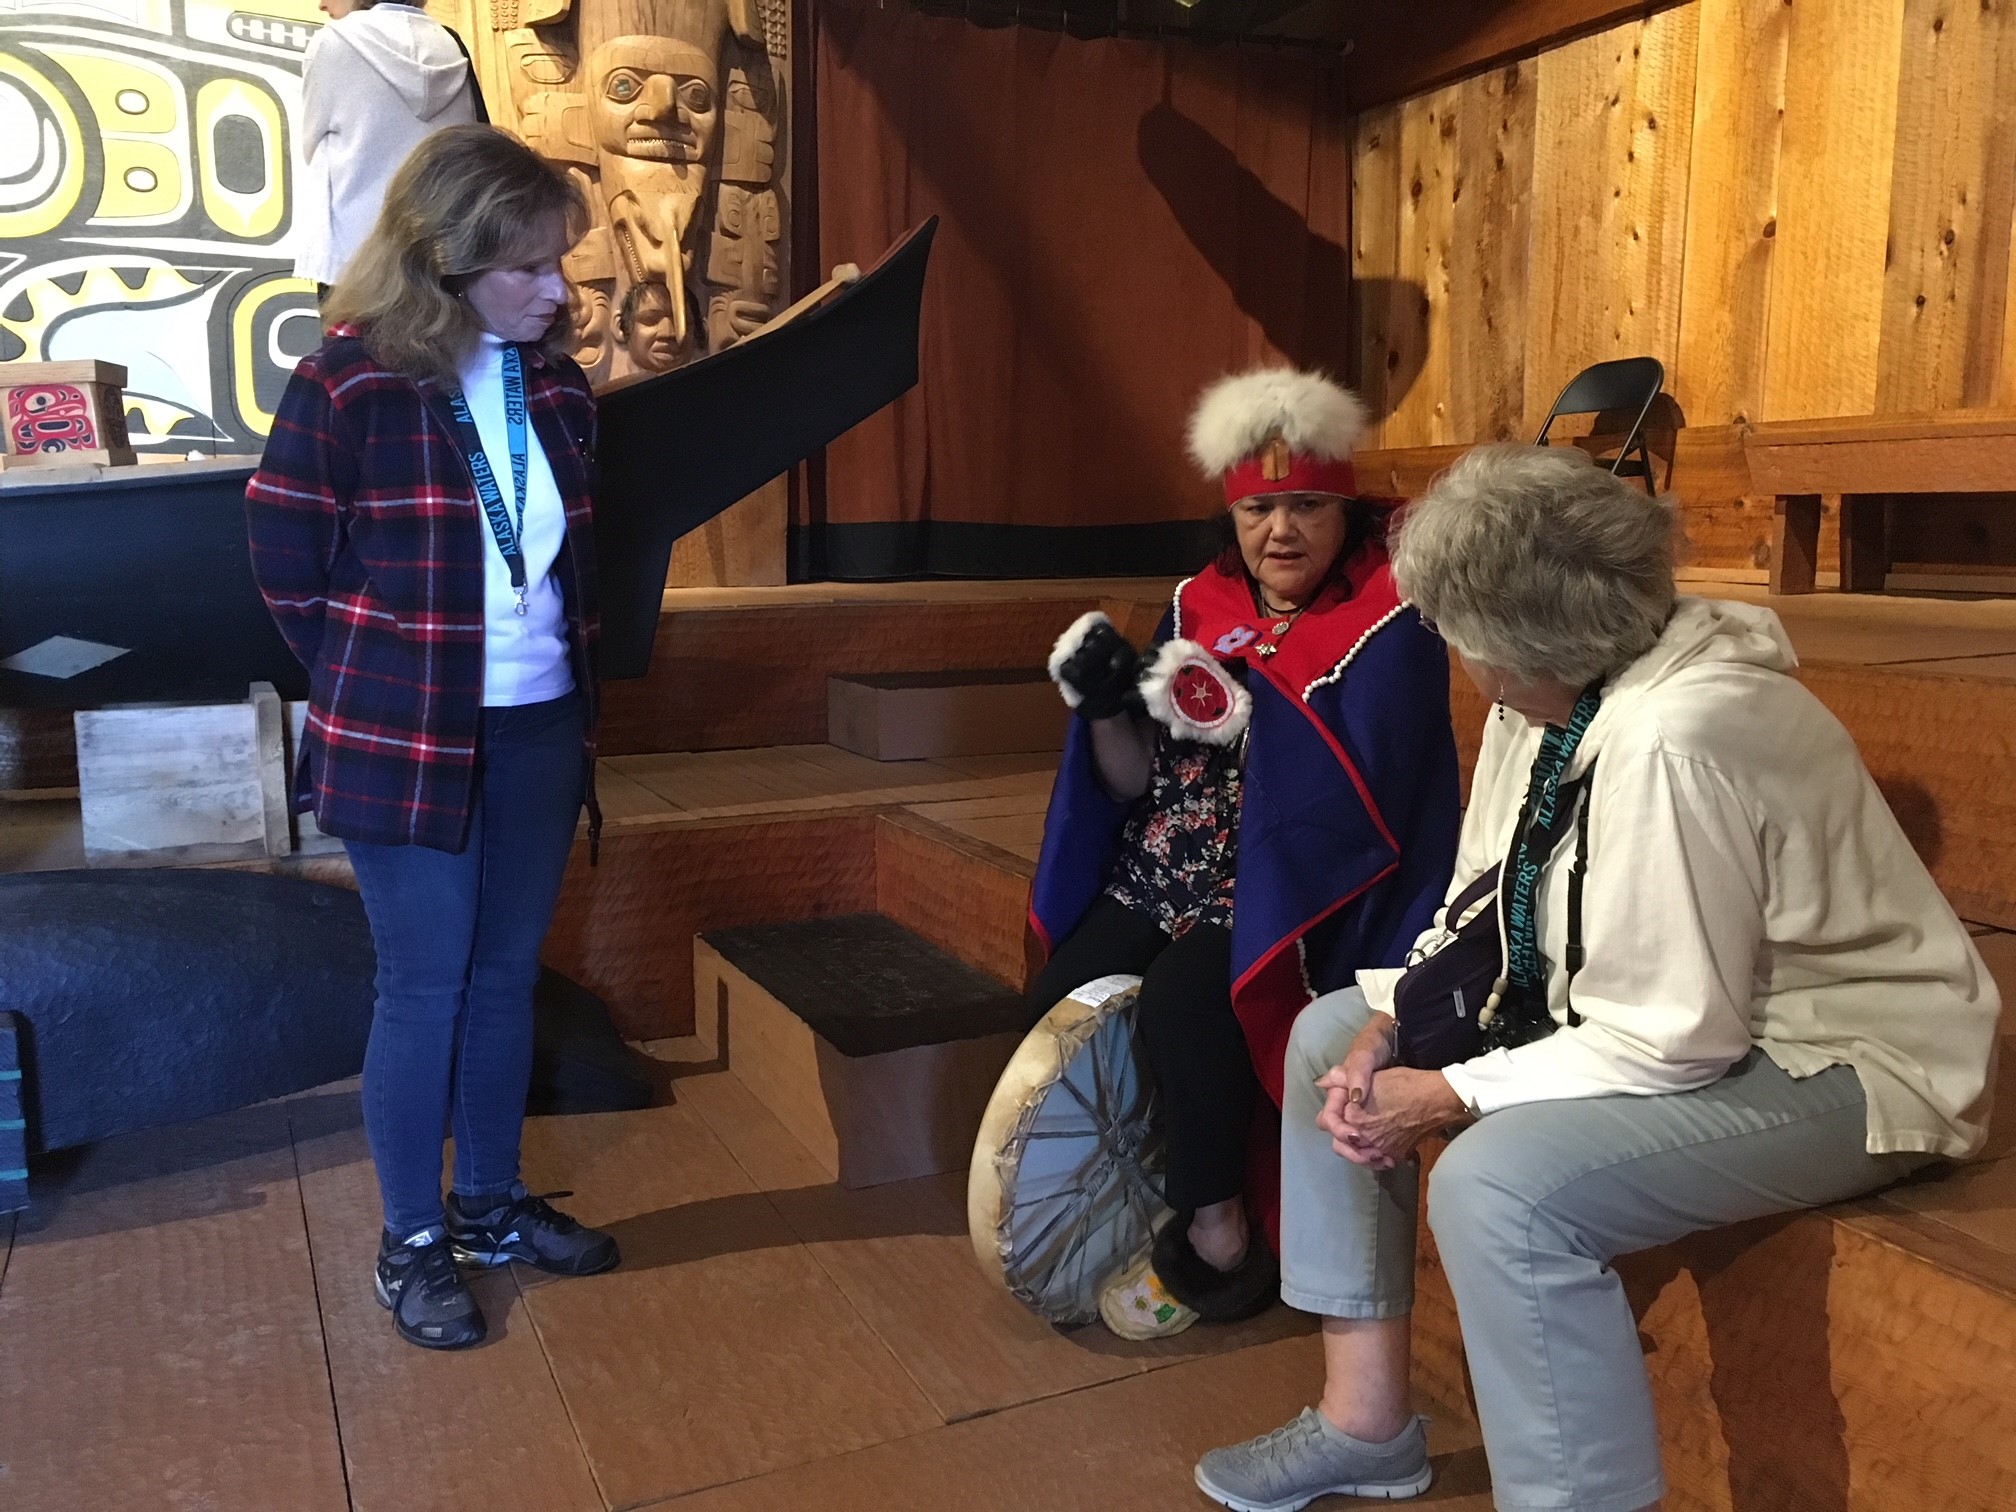 Virginia Oliver performs Tlingit dances and stories for tourists in Wrangell at Chief Shakes’ Tribal House. (Photo by June Leffler/ KSTK)